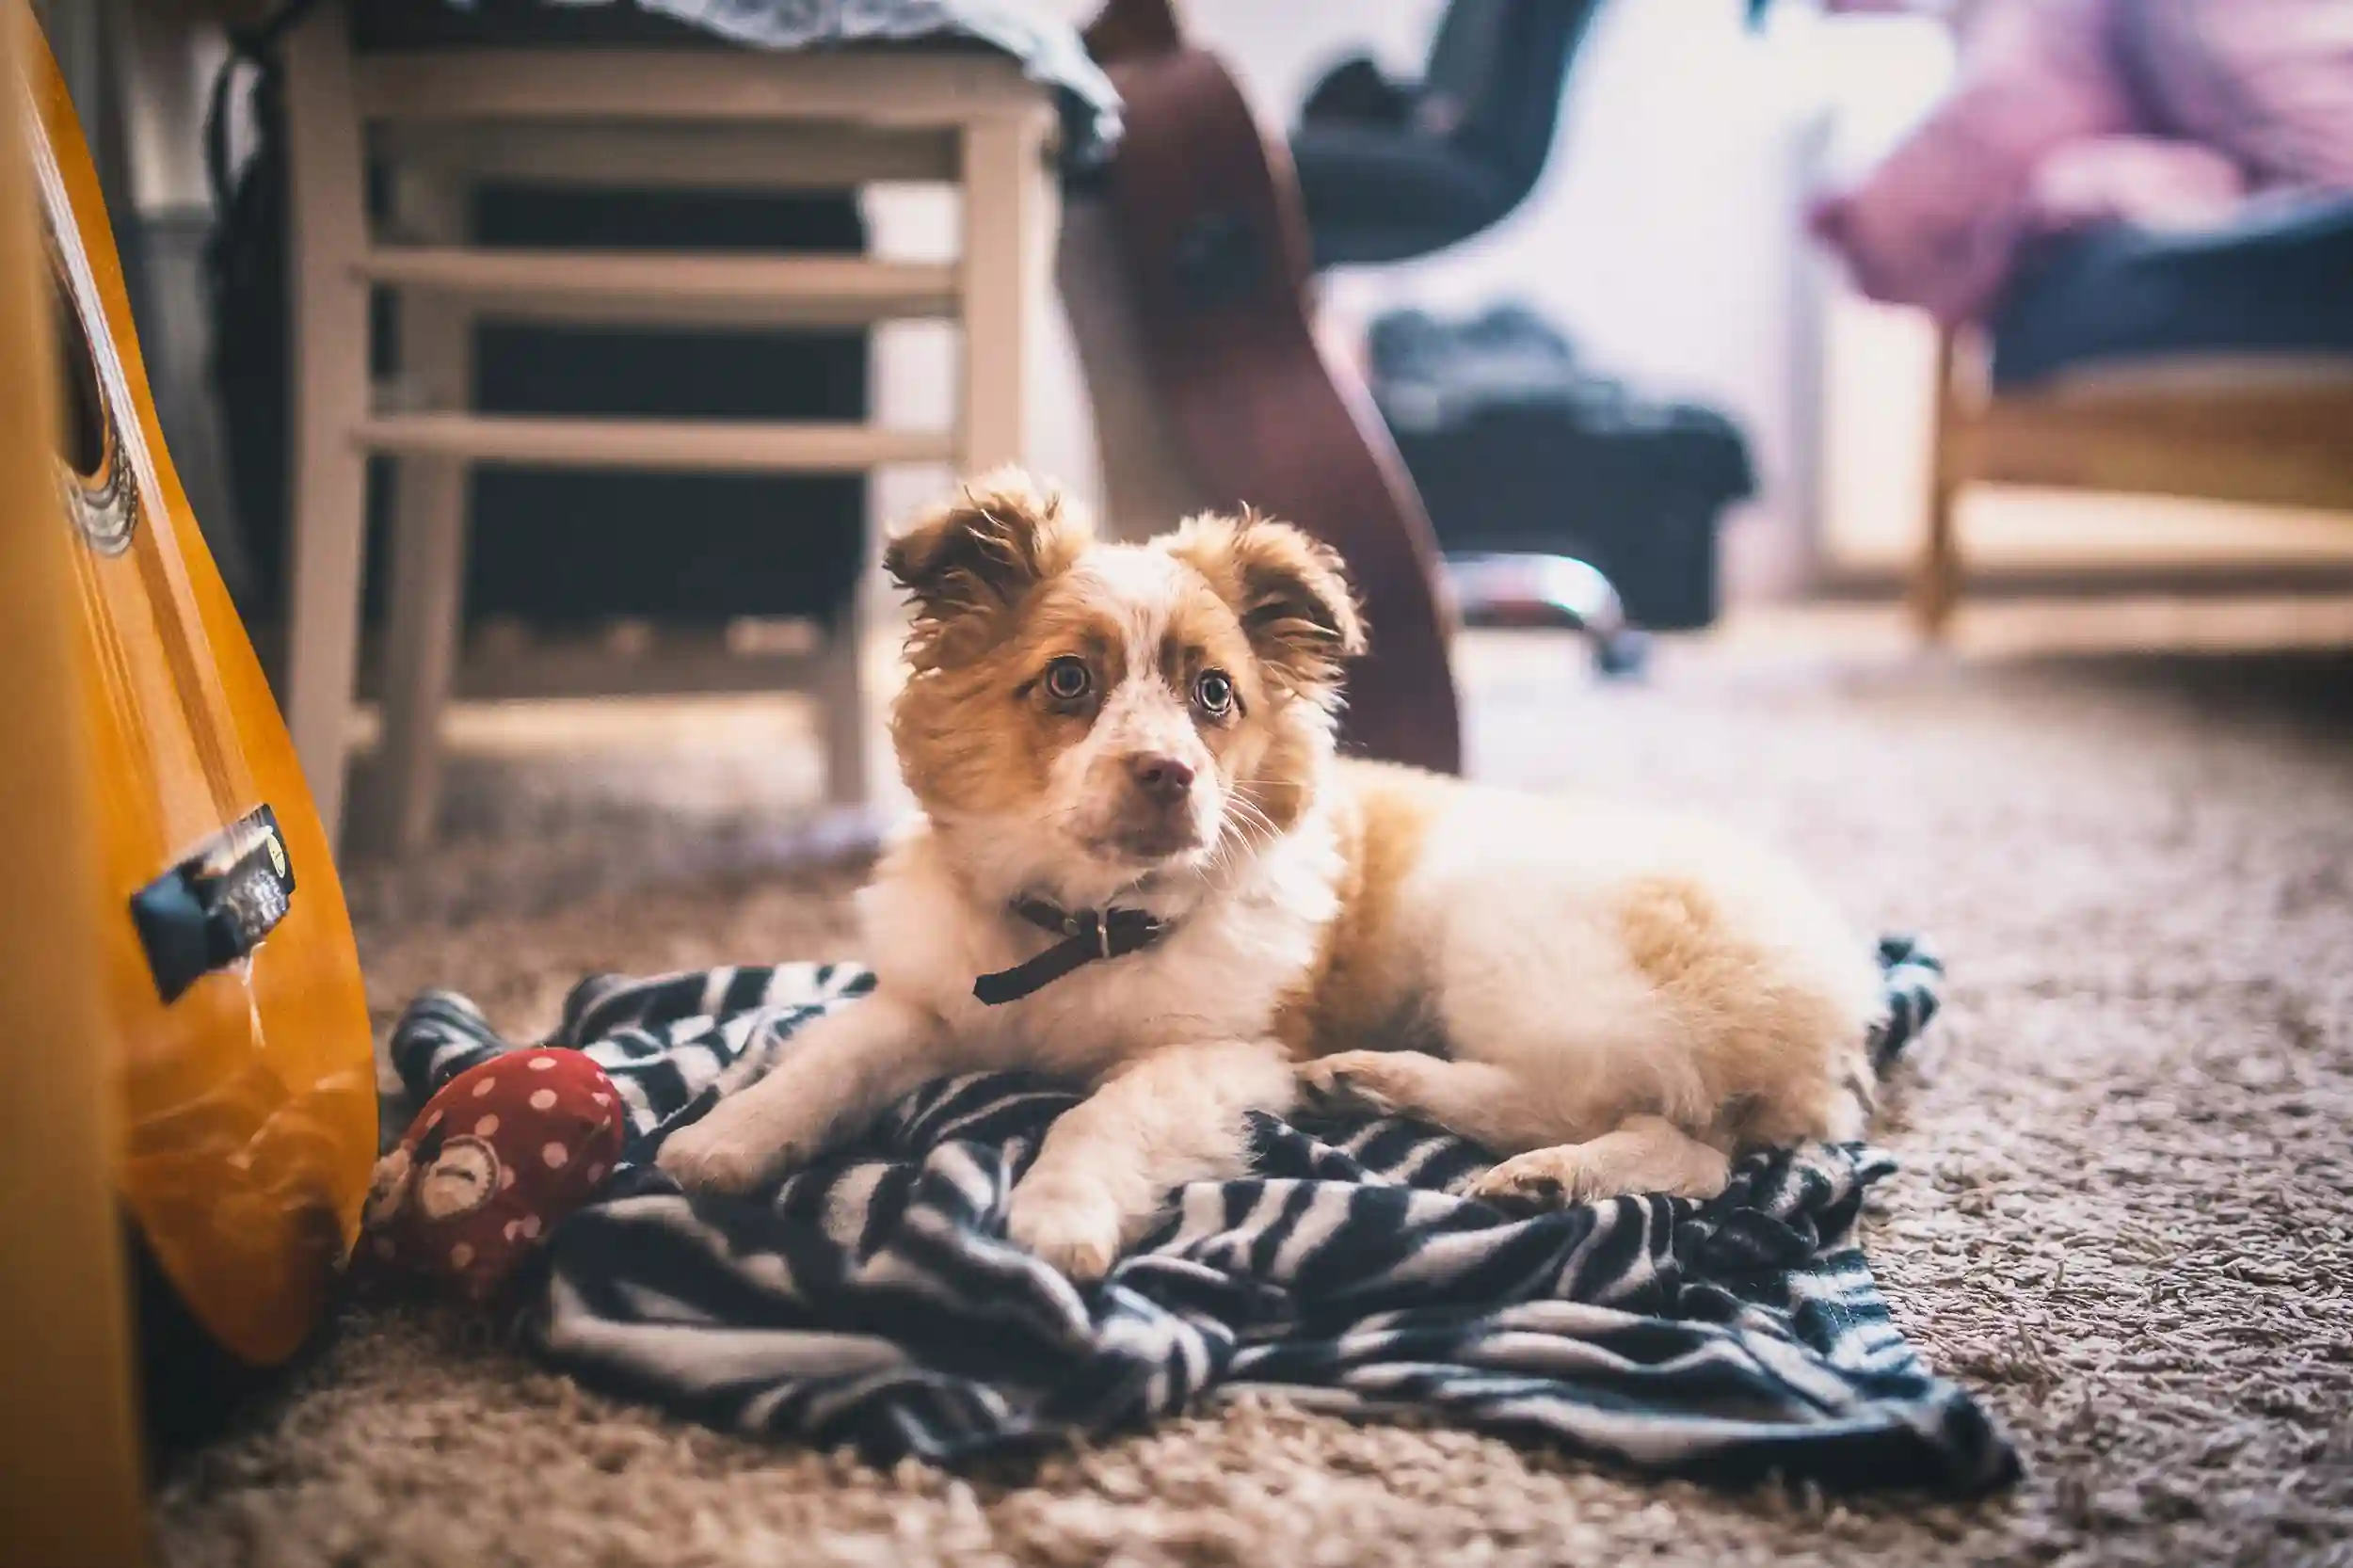 Expert Tips On How To Clean Dog Diarrhea From Carpet